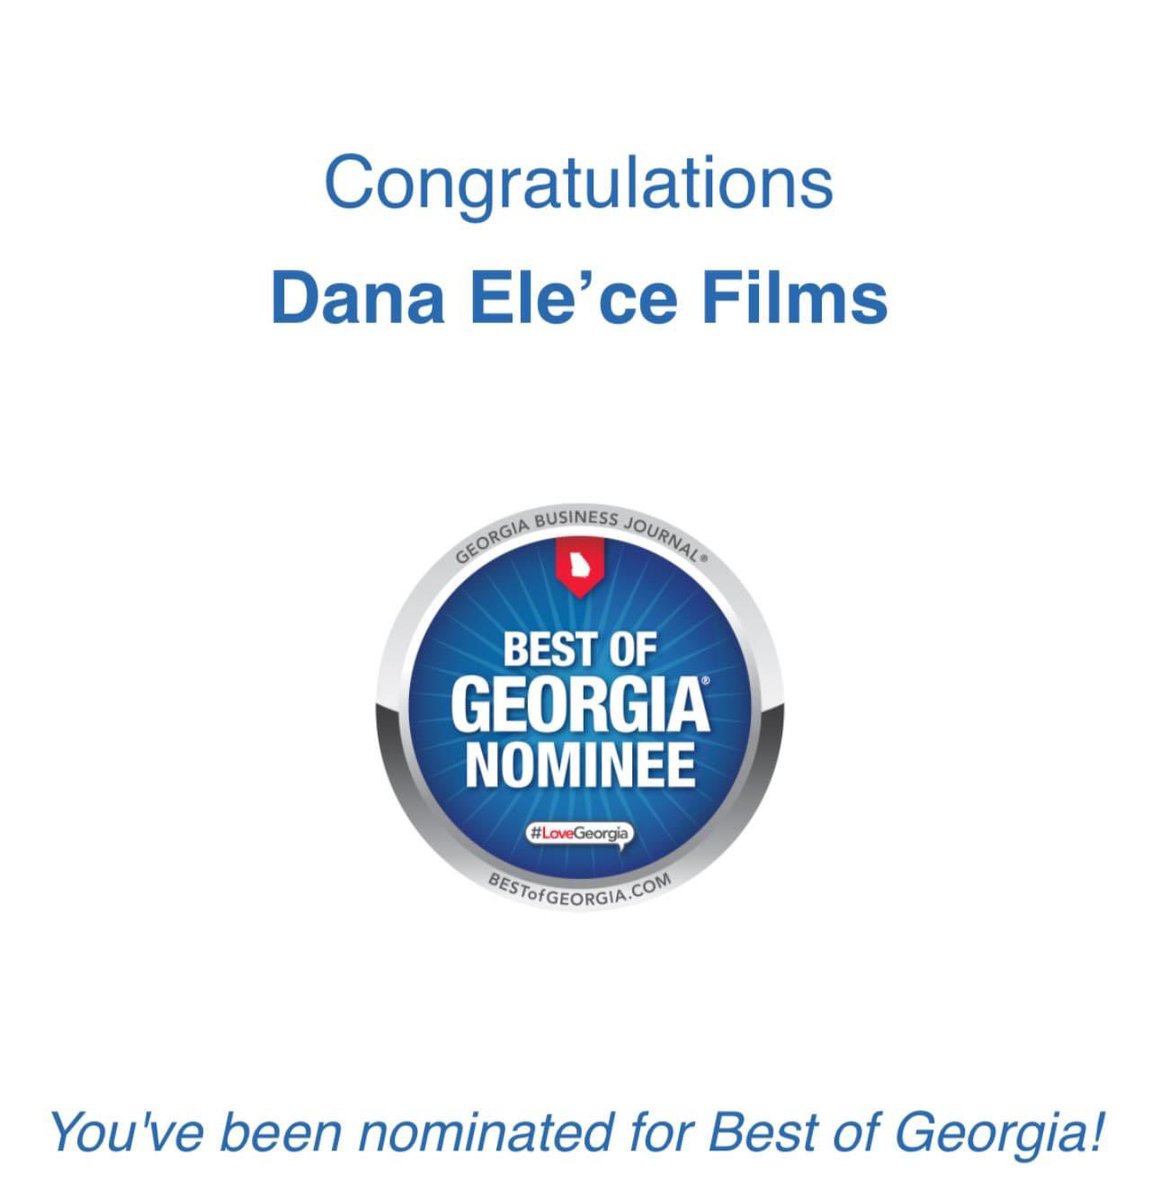 This my last tweet for a minute 

but I’m proud to announce that Dana Ele’ce Films has been nominated for #BESTofGEORGIA! Help us win by voting for us at BESTofGEORGIA.com in the Wedding & Event category! Thank y’all!